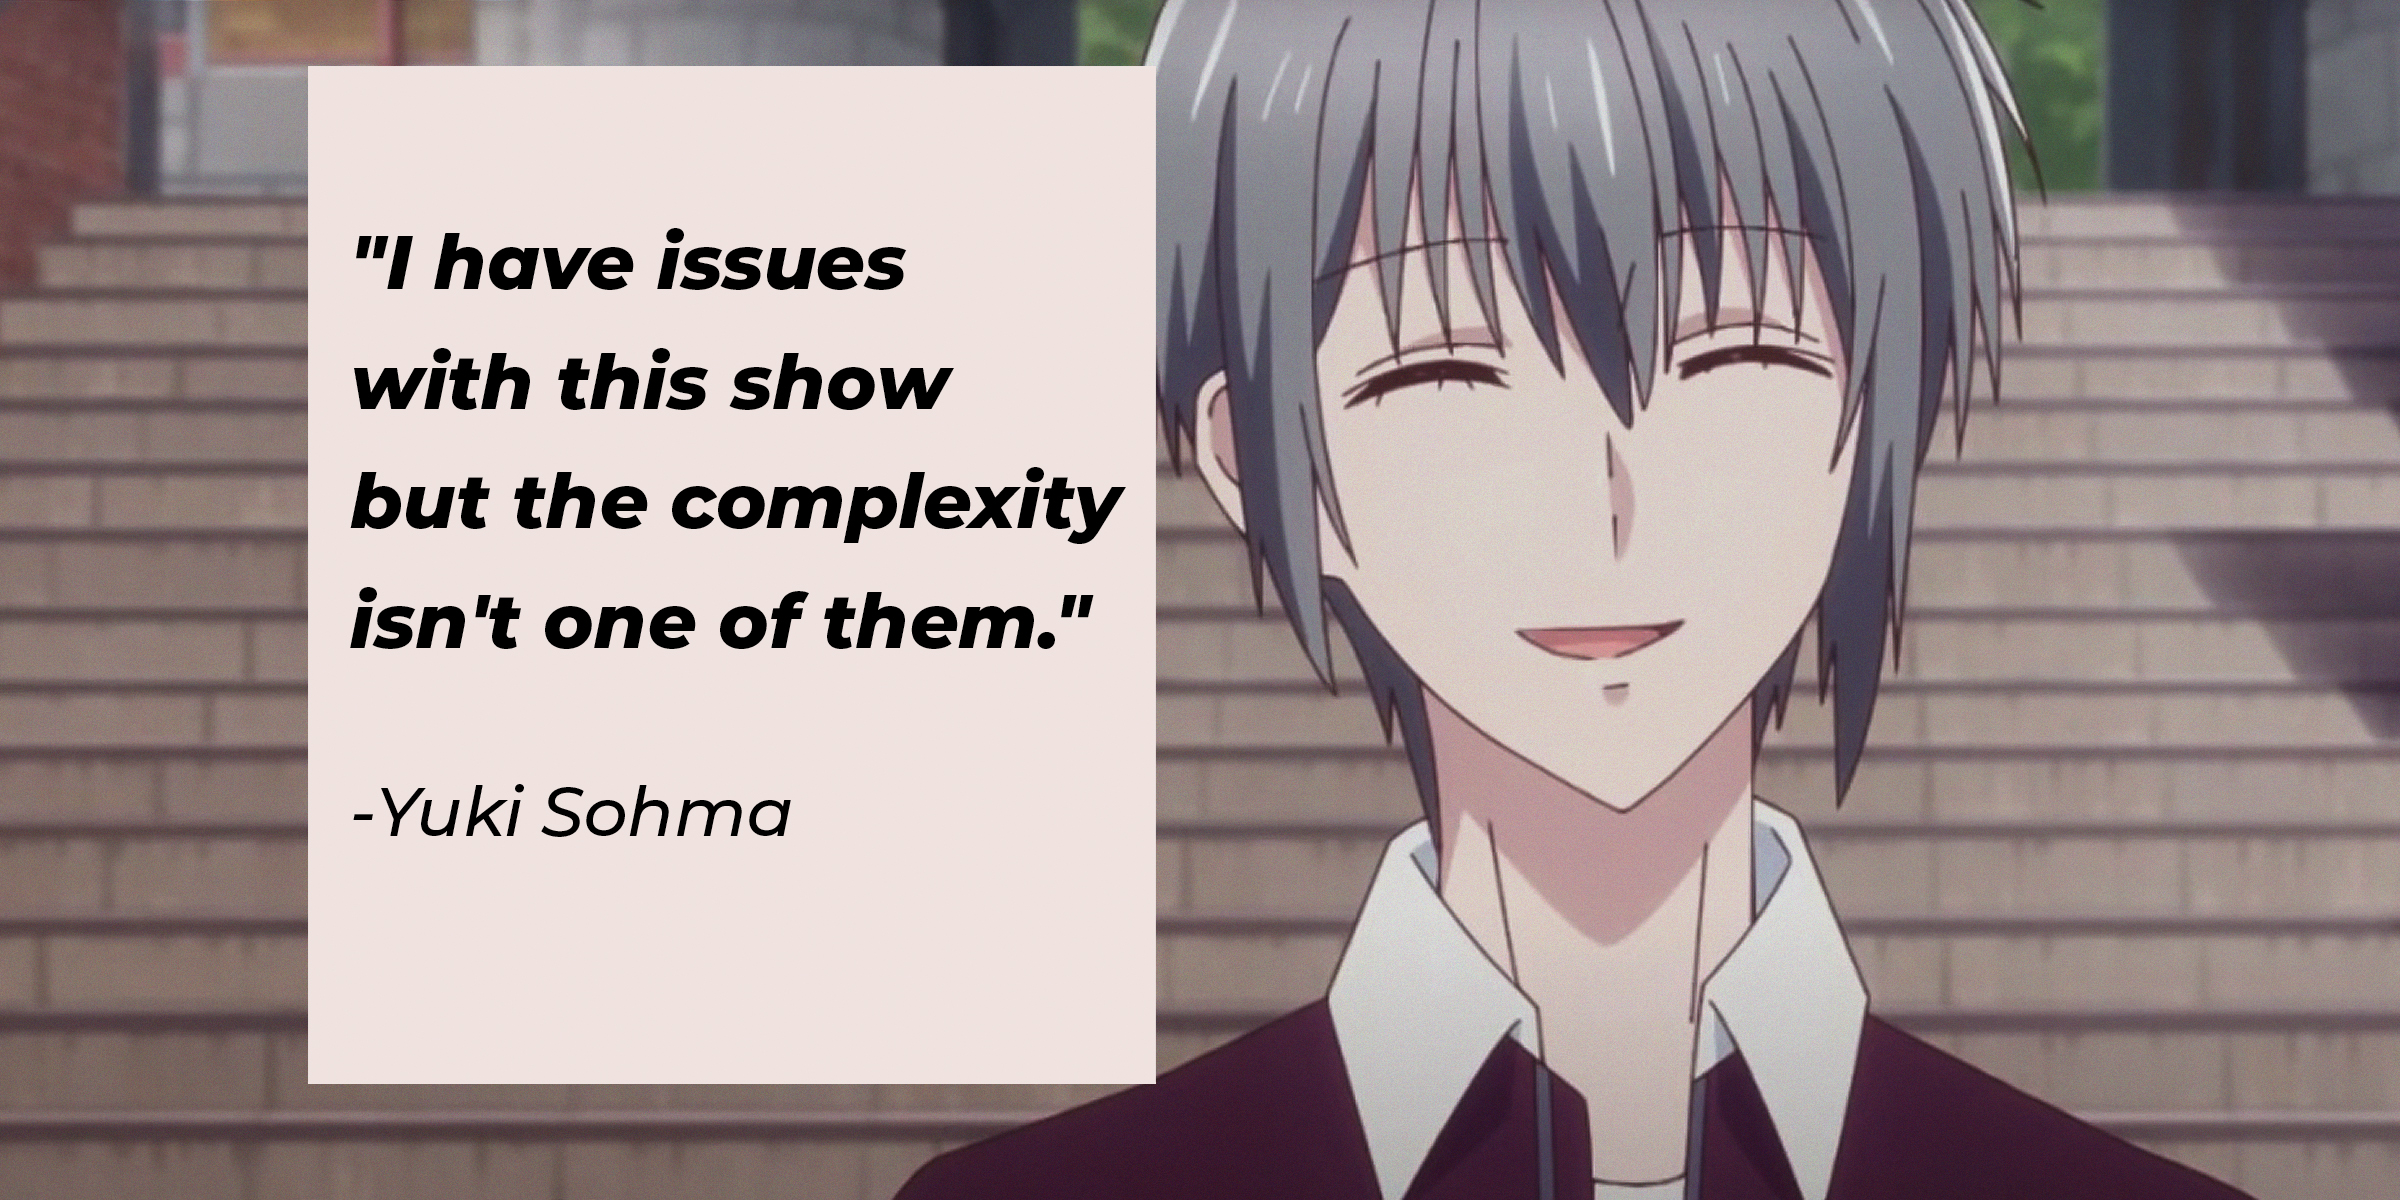 Photo of Yuki Sohma with the quote: "I have issues with this show but the complexity isn't one of them." | Source: Facebook.com/FruitsBasketOfficial